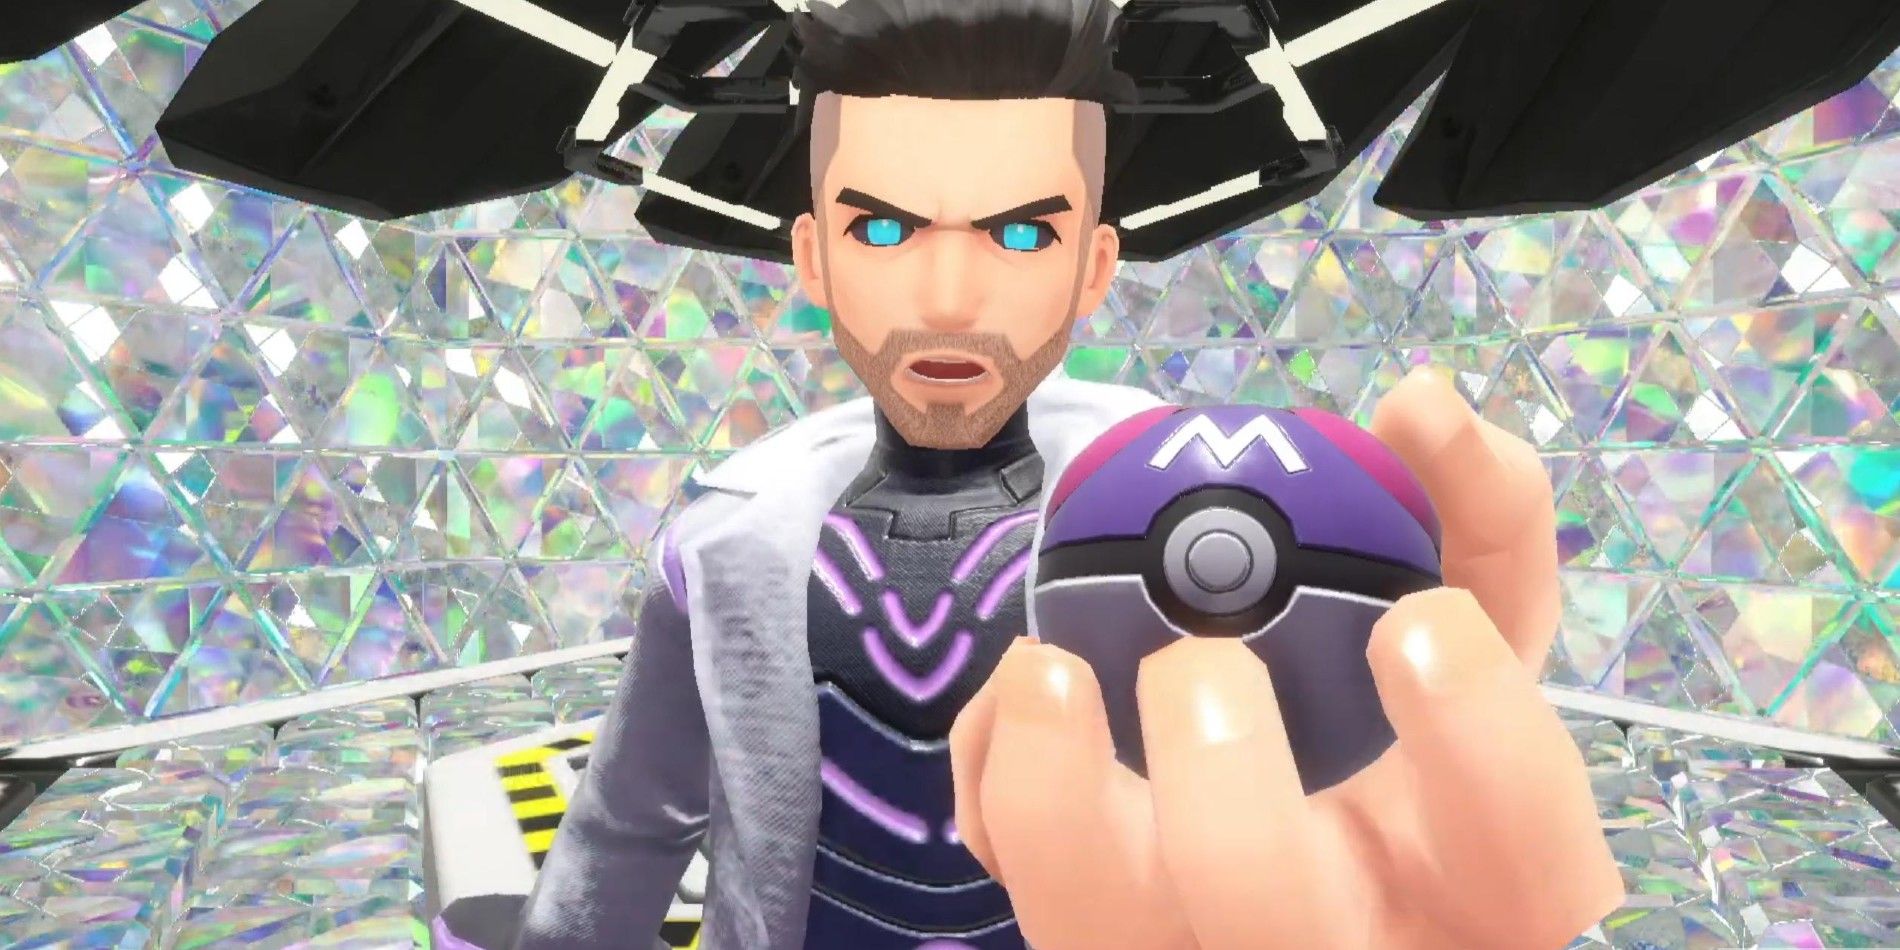 Professor Turo from Pokémon Violet, standing in a chamber with kaleidoscopic walls and holding a Master Ball toward the camera while his eyes are completely a bright blue.